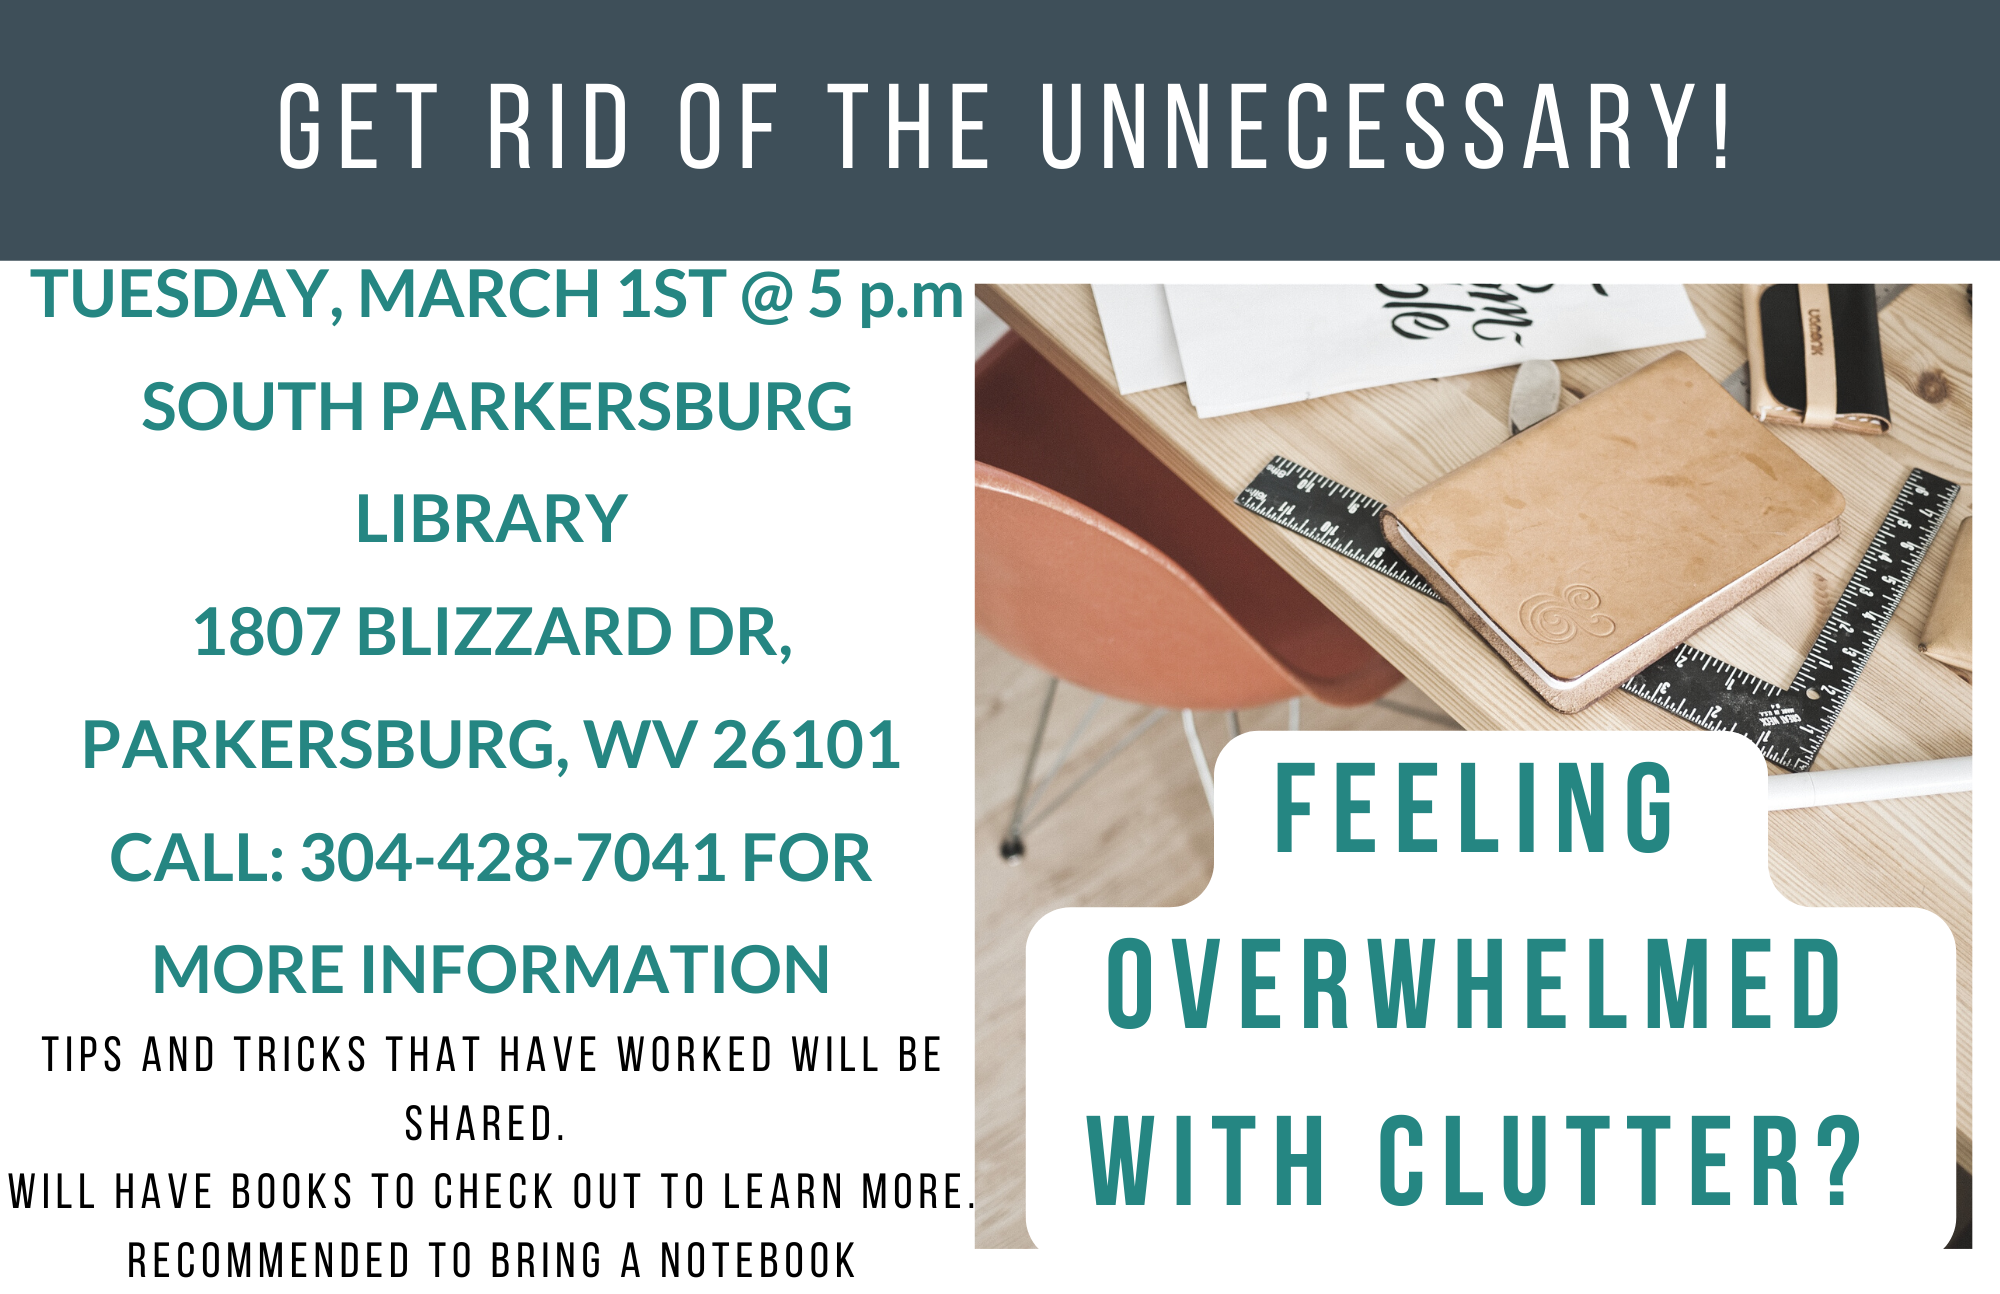 Get Rid of the Unnecessary! Class at South Parkersburg